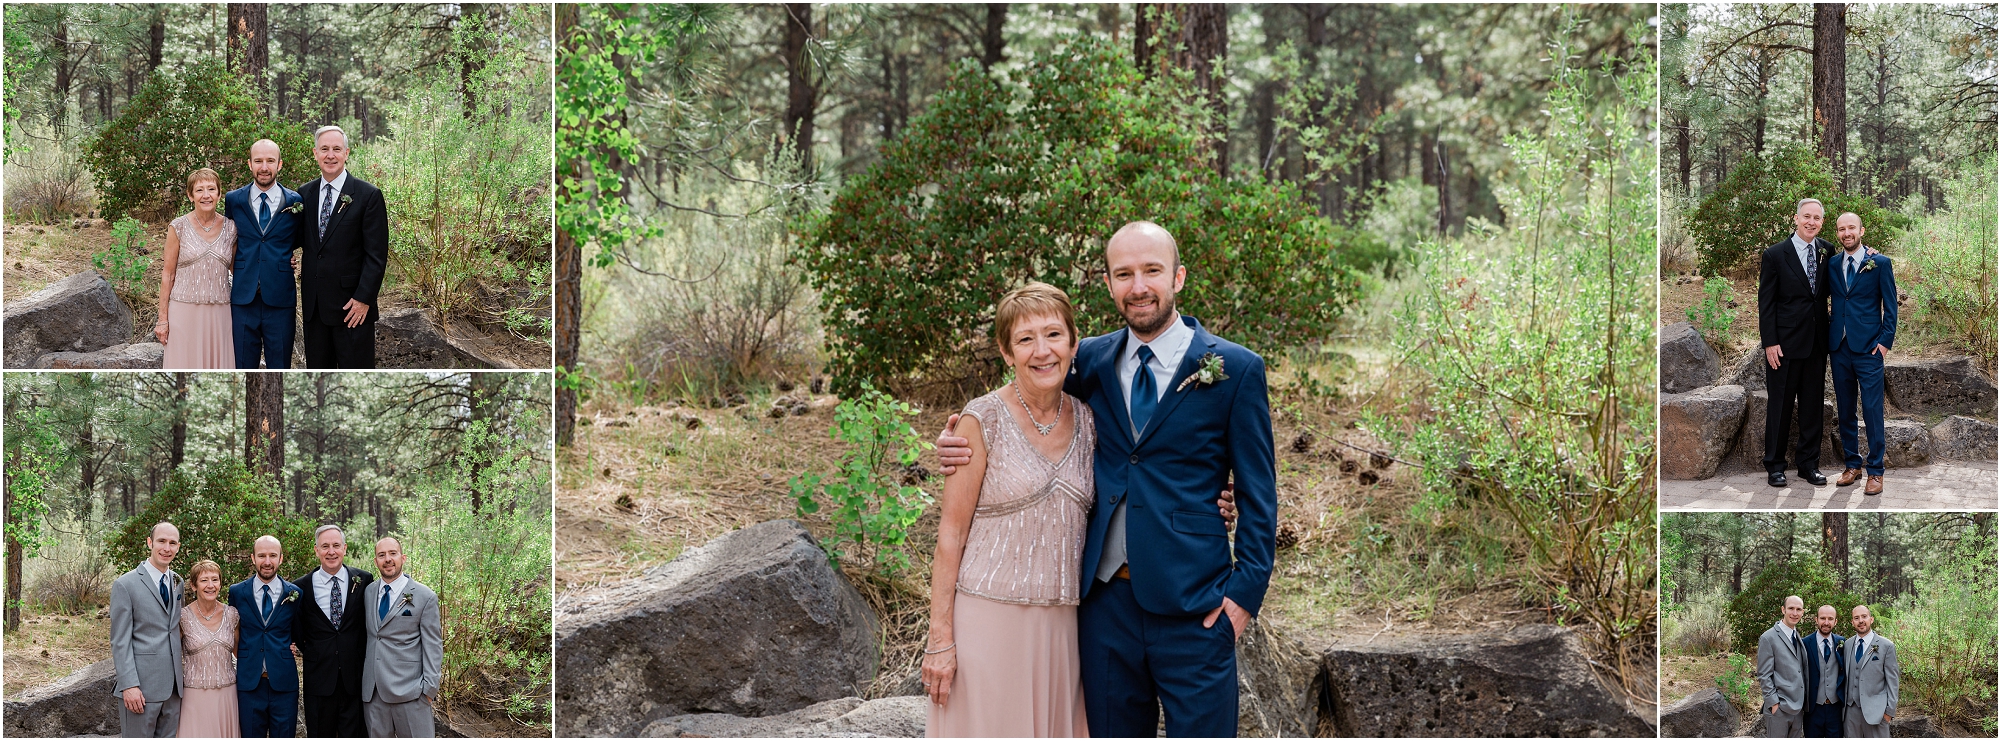 The groom and his family at a Bend Oregon wedding at the High Desert Museum. | Erica Swantek Photography